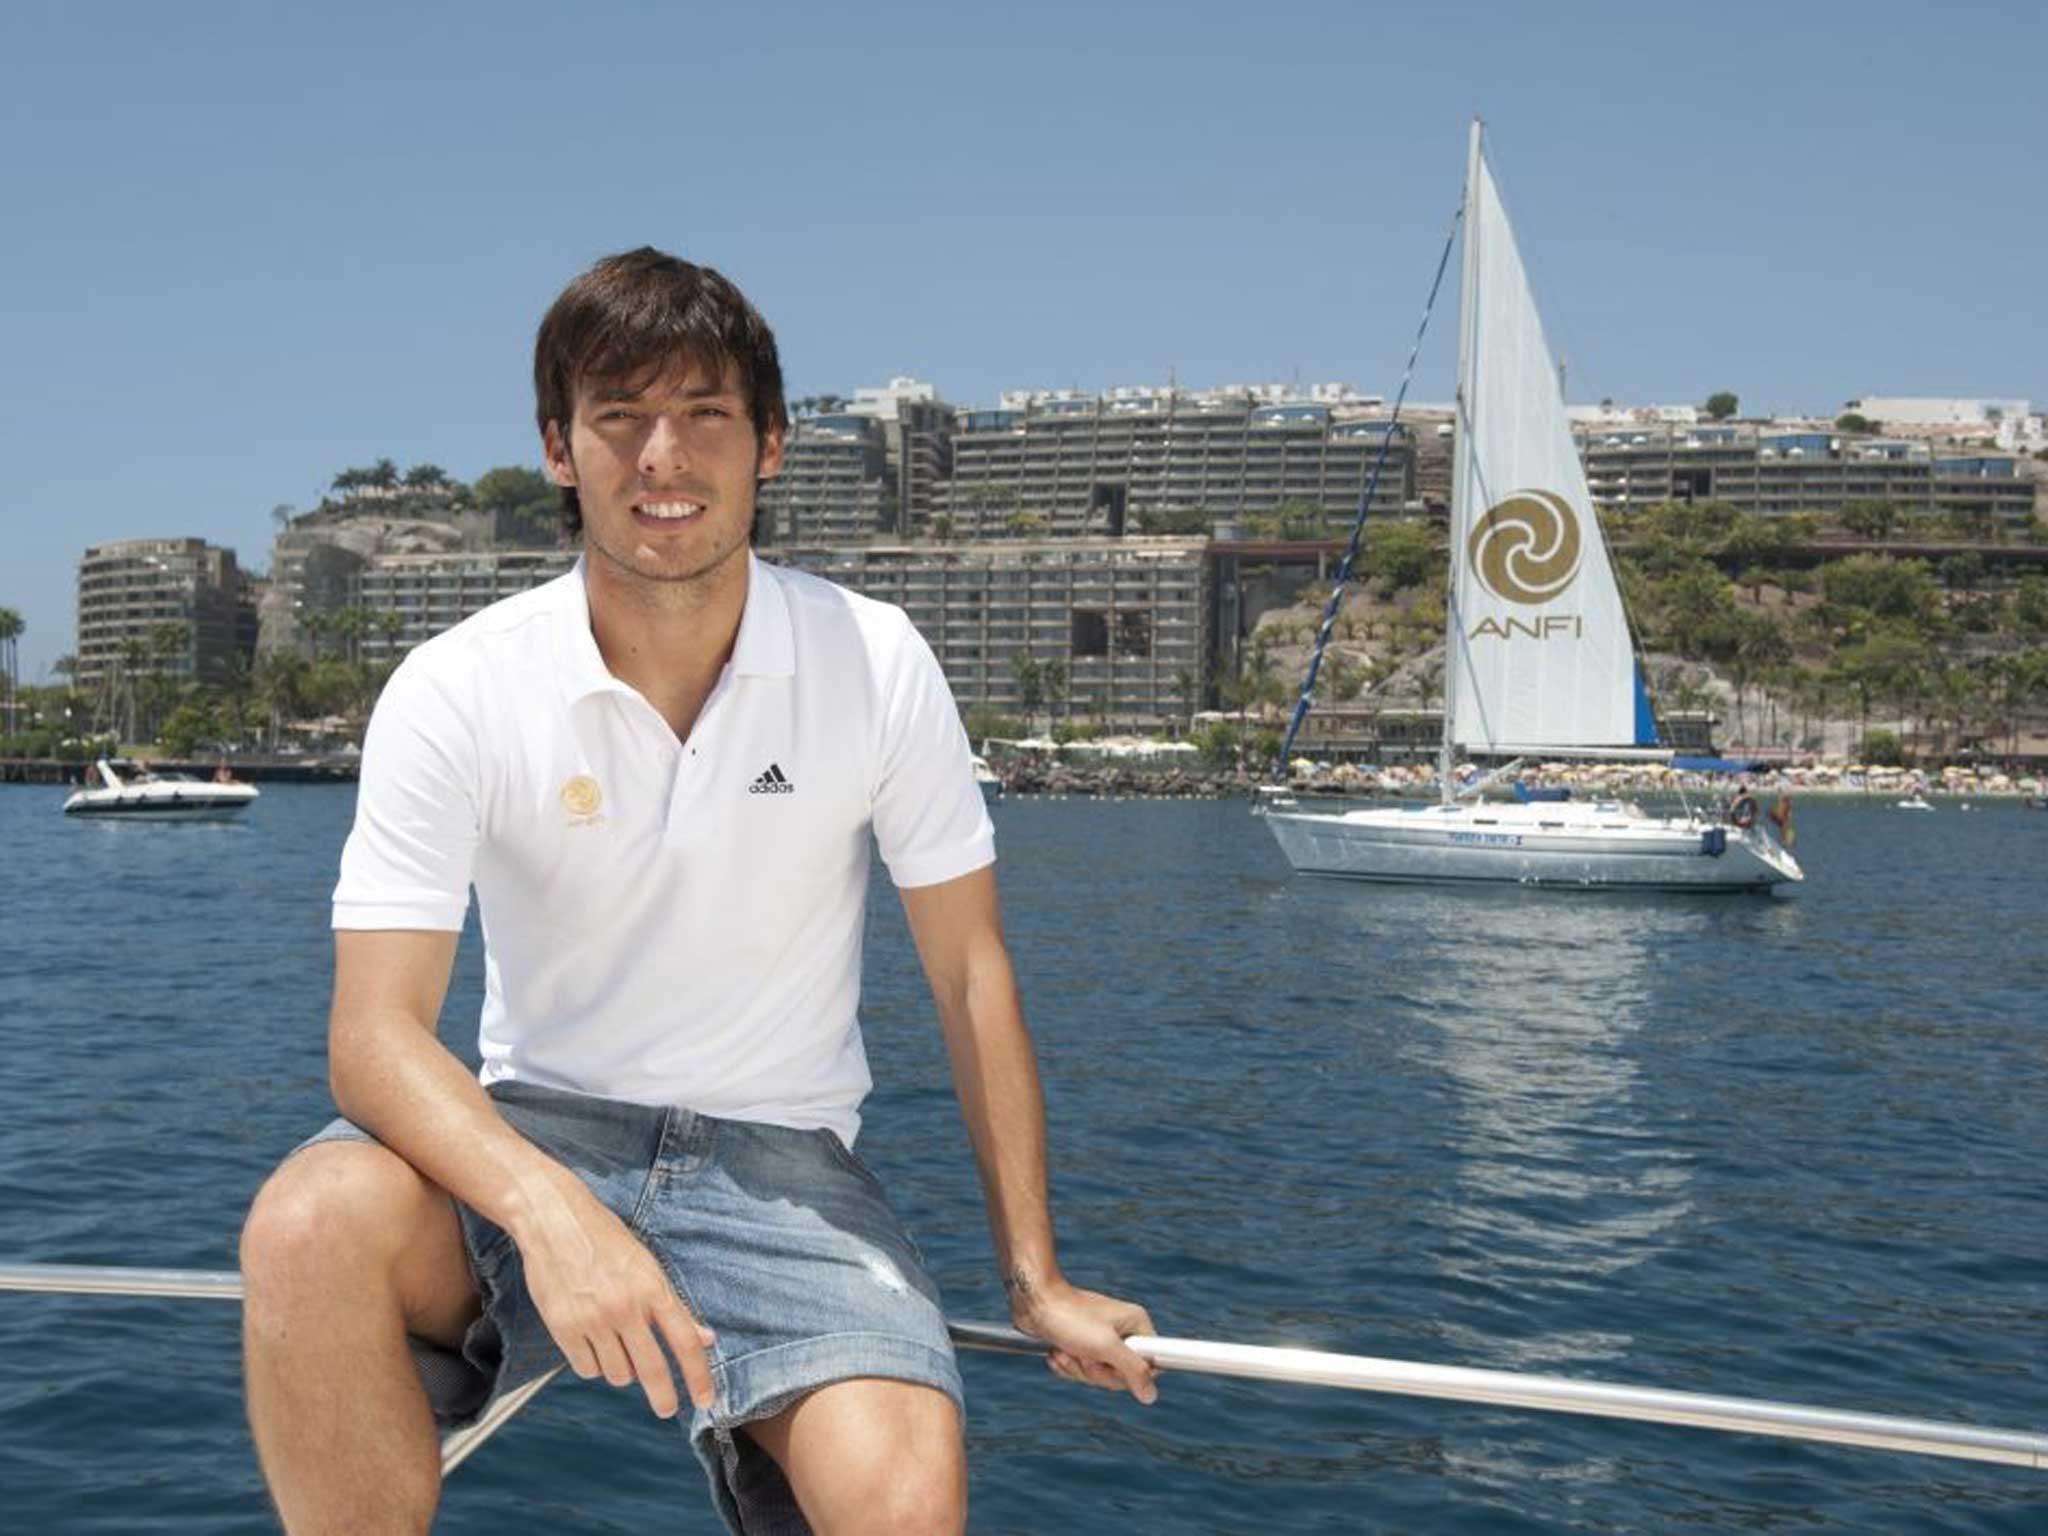 David Silva is an ambassador for Anfi Group, a luxury holiday company on the holiday island of Gran Canaria